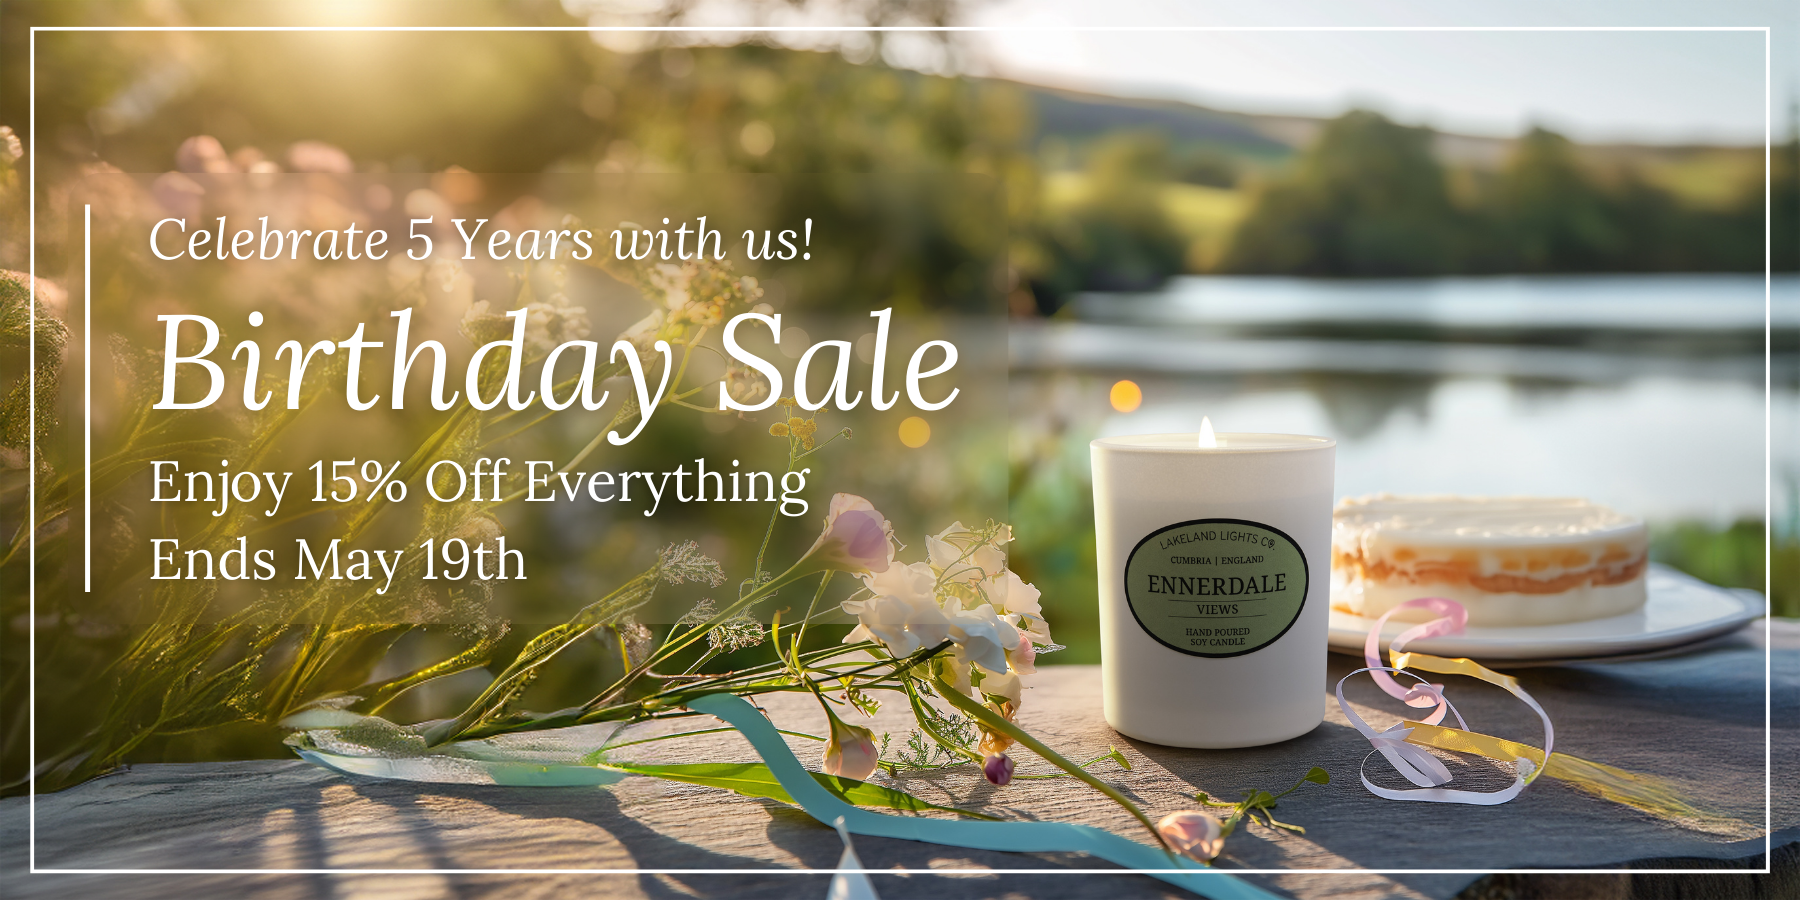 A Lakeland Lights luxury scented soy candle set in the beautiful Cumbrian scenery with a birthday cake behind to celebrate the company's 5th birthday. Text announces a sale lasting until 19th May with 15% off everything on the website